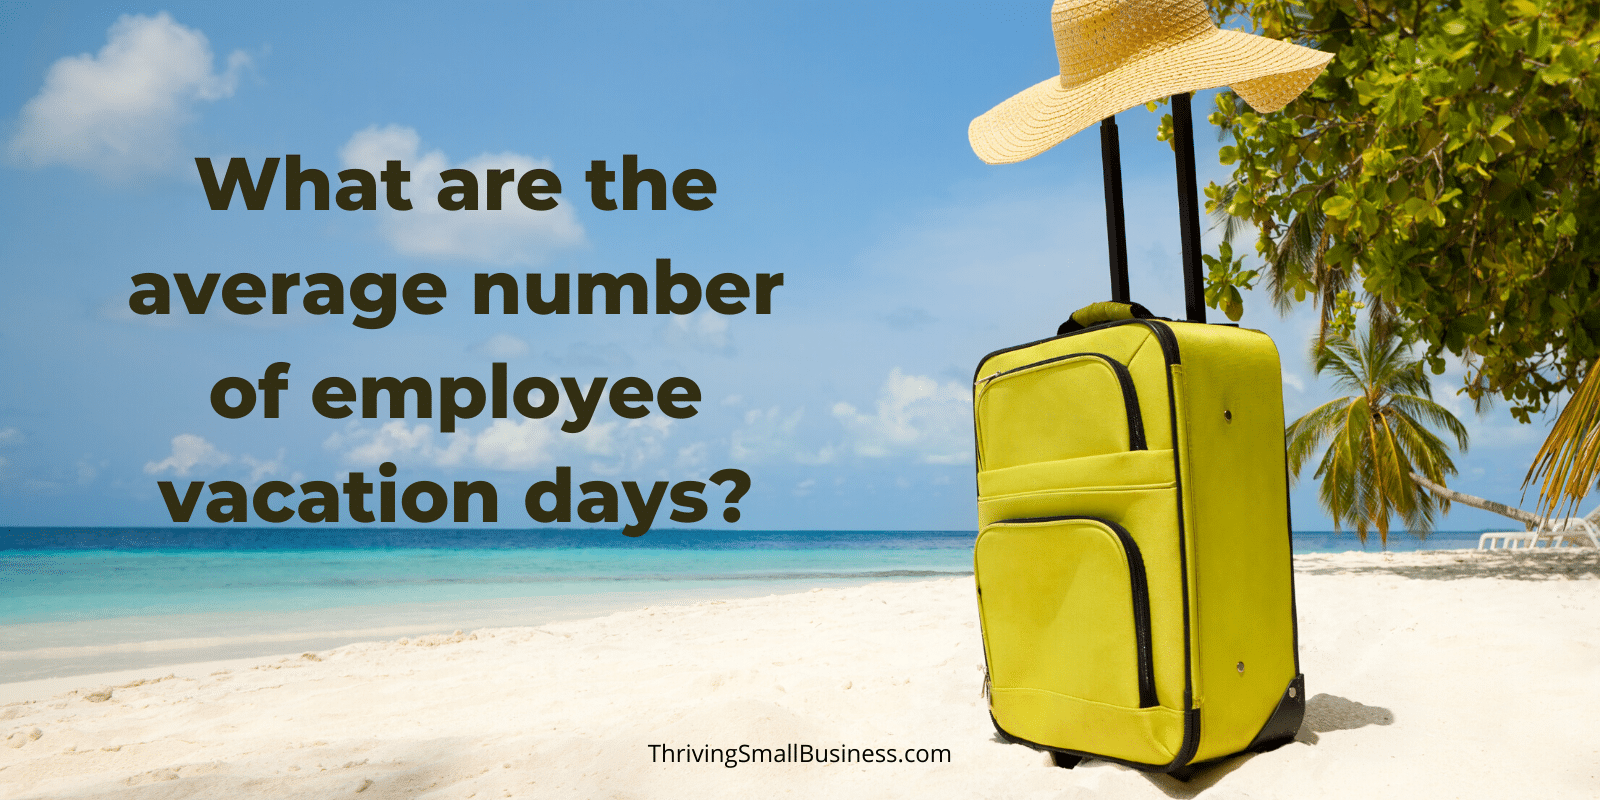 what are the average number of vacation days